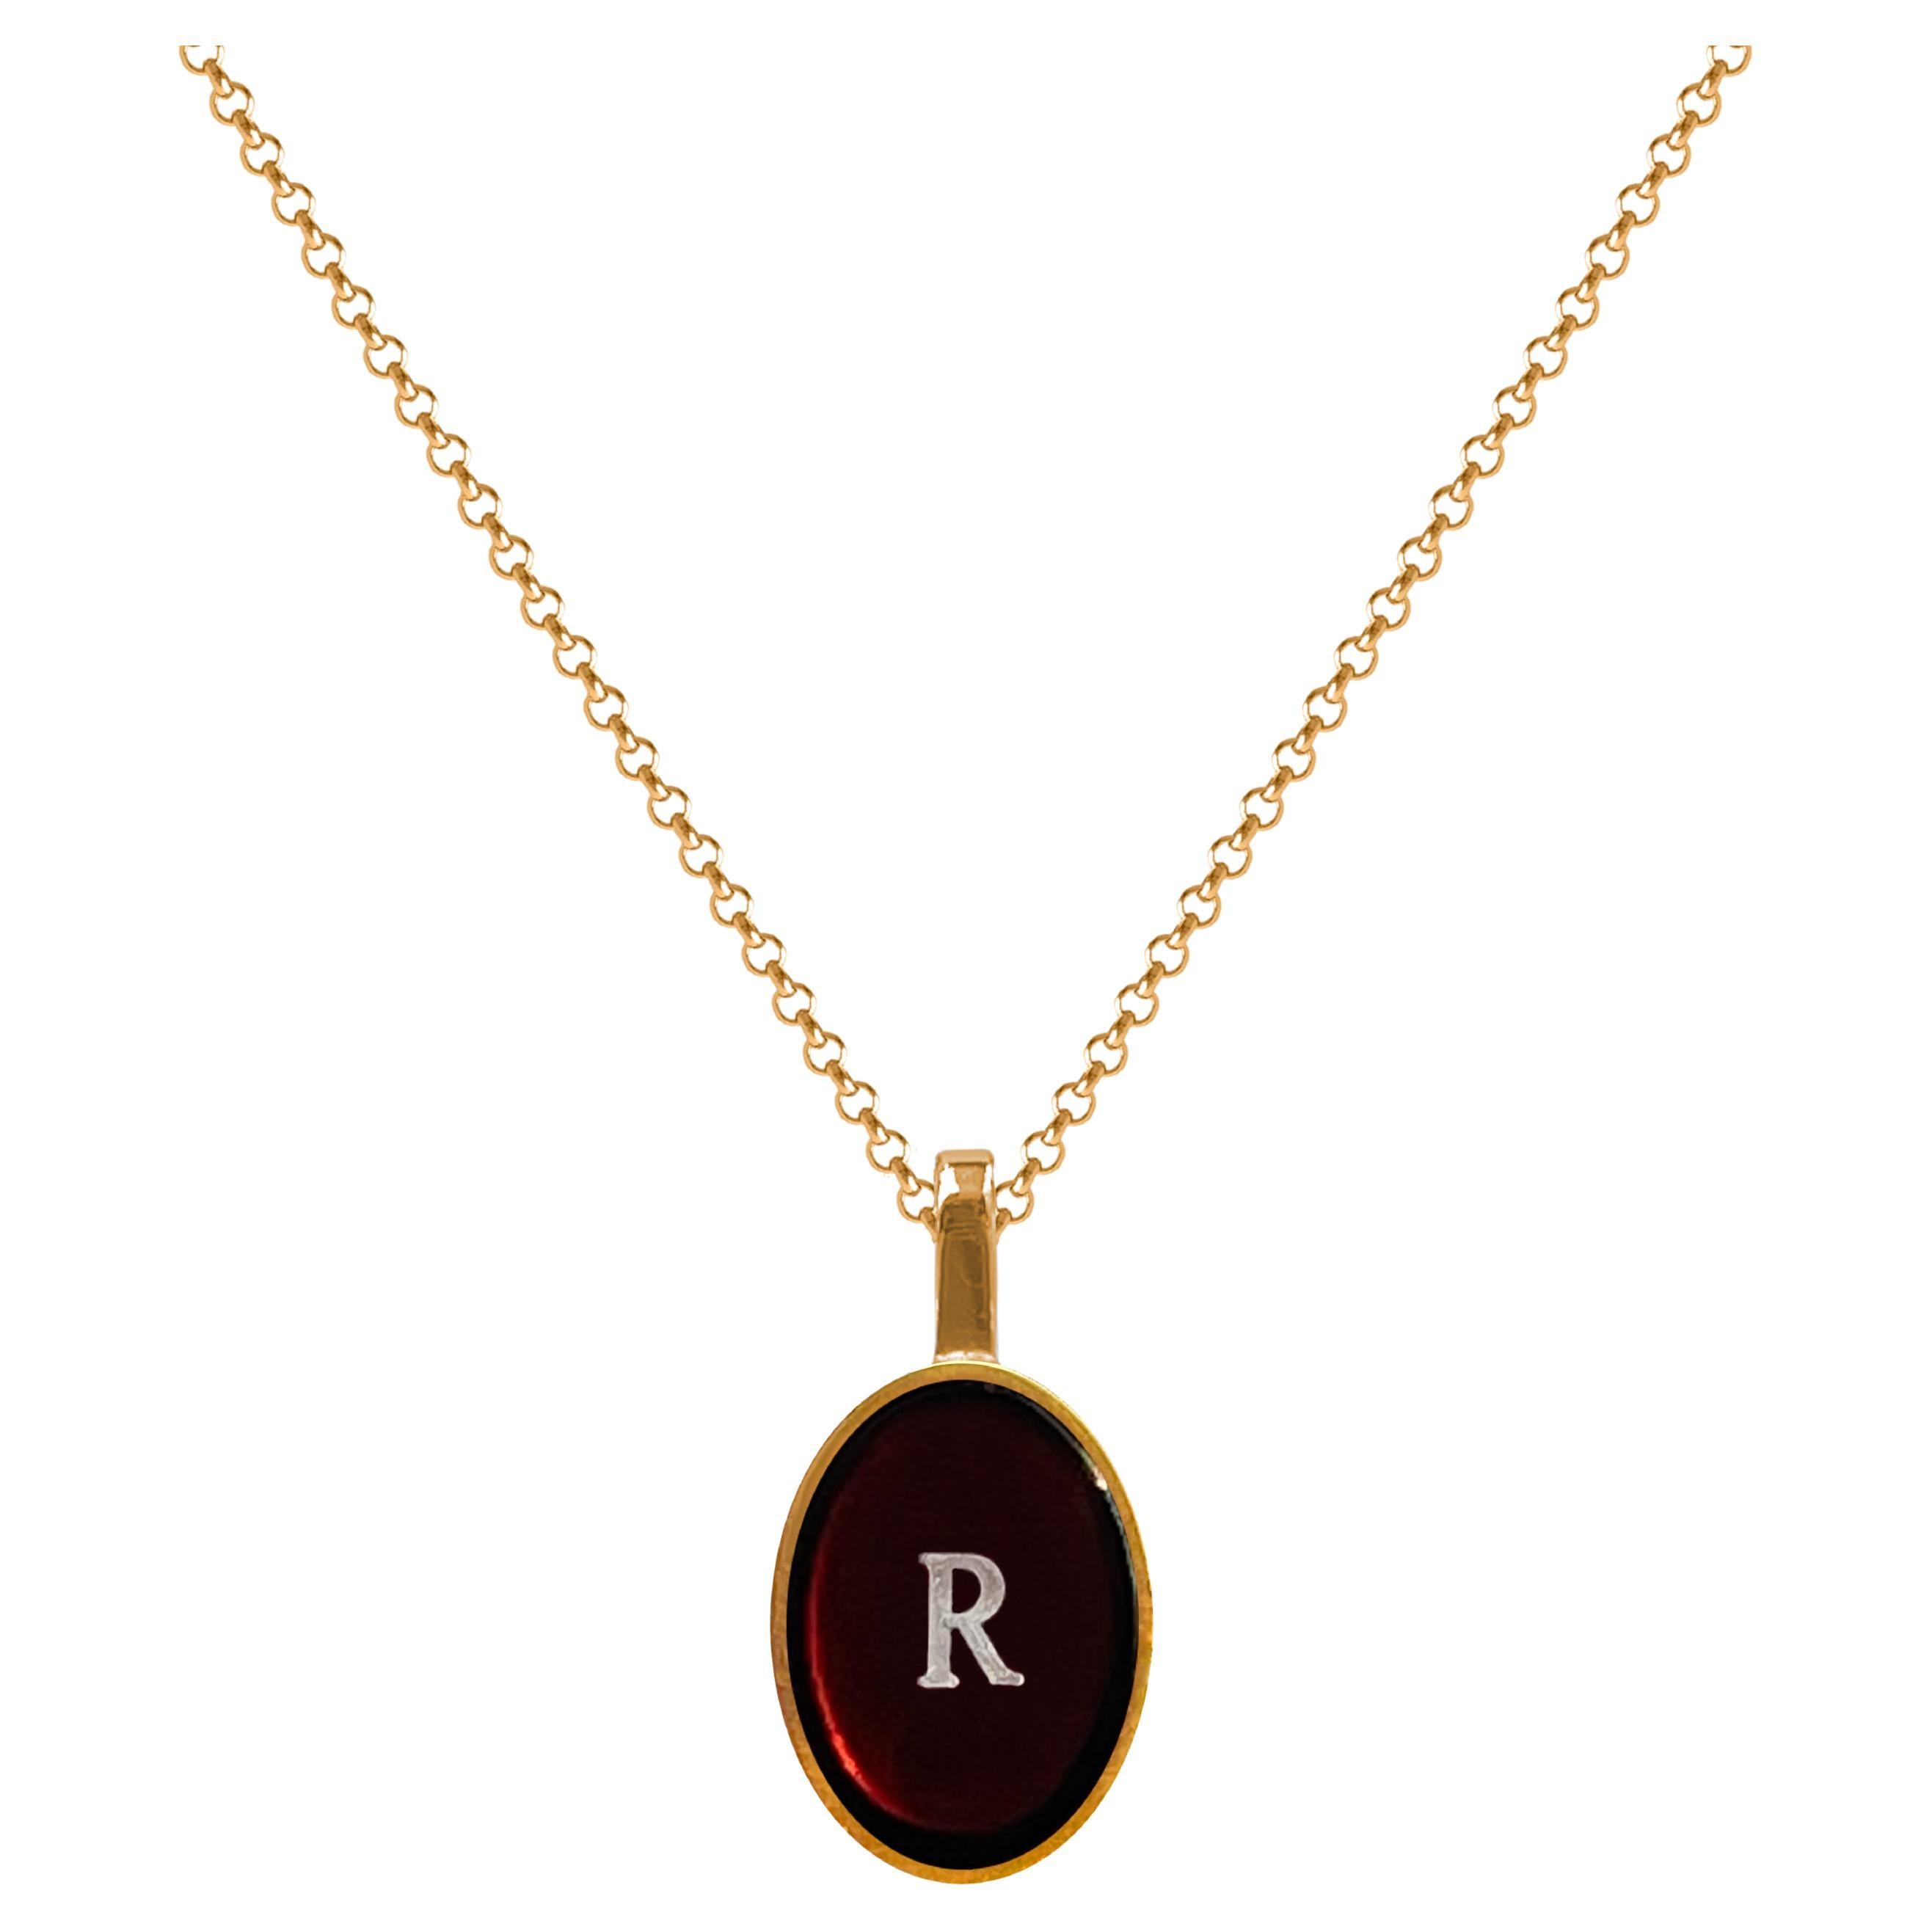 Necklace with amber pendant and name letter gold - R For Sale